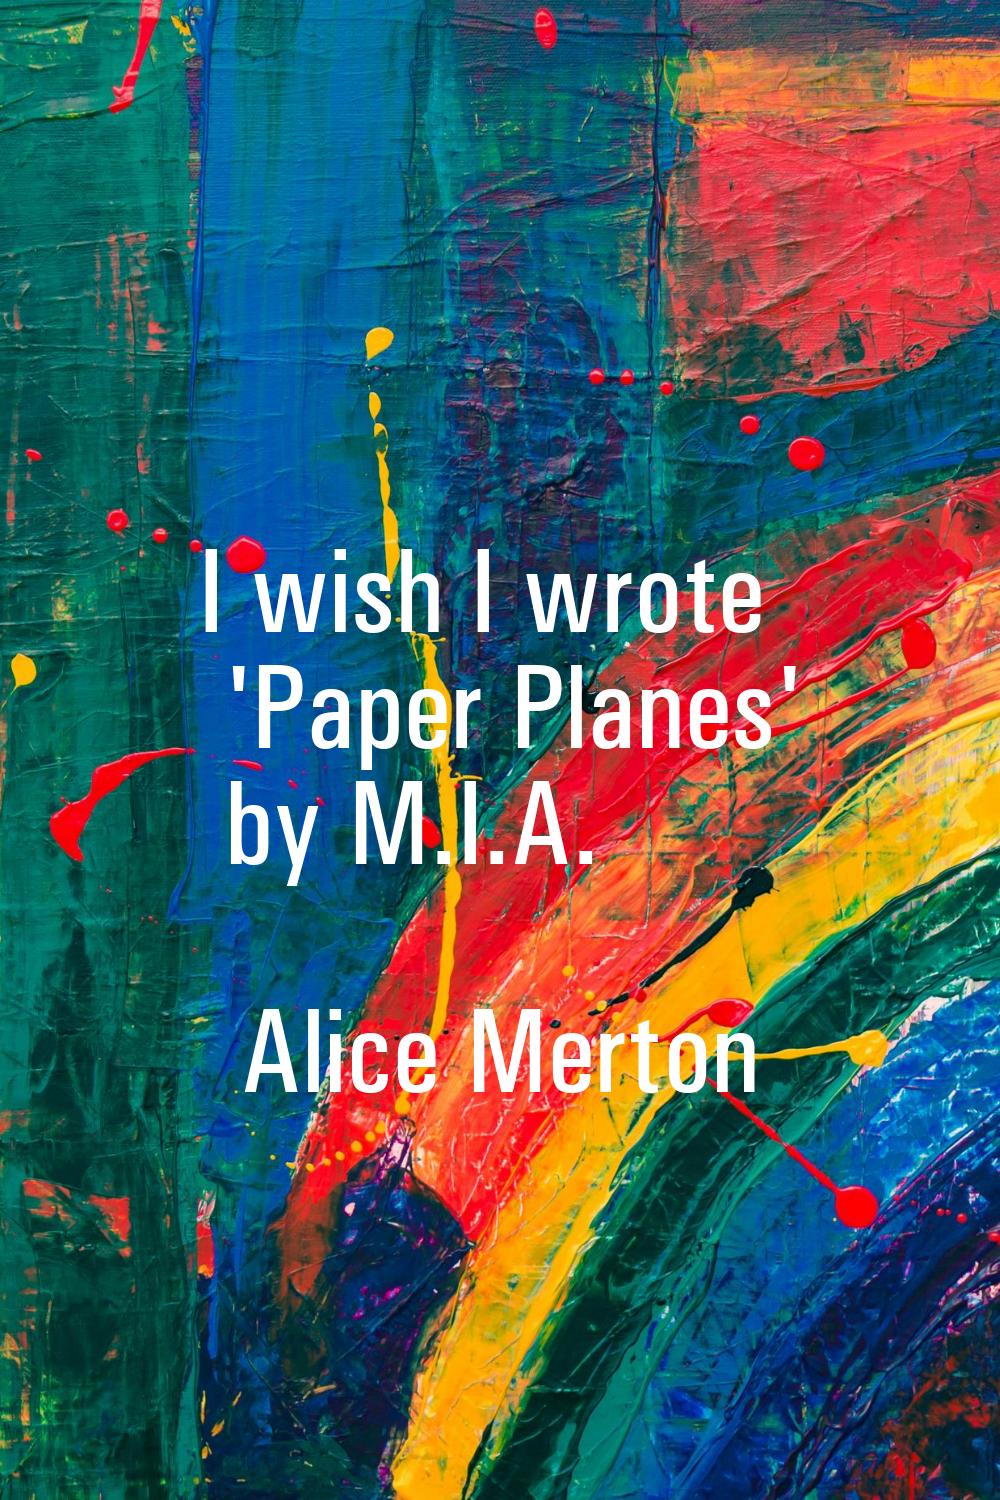 I wish I wrote 'Paper Planes' by M.I.A.